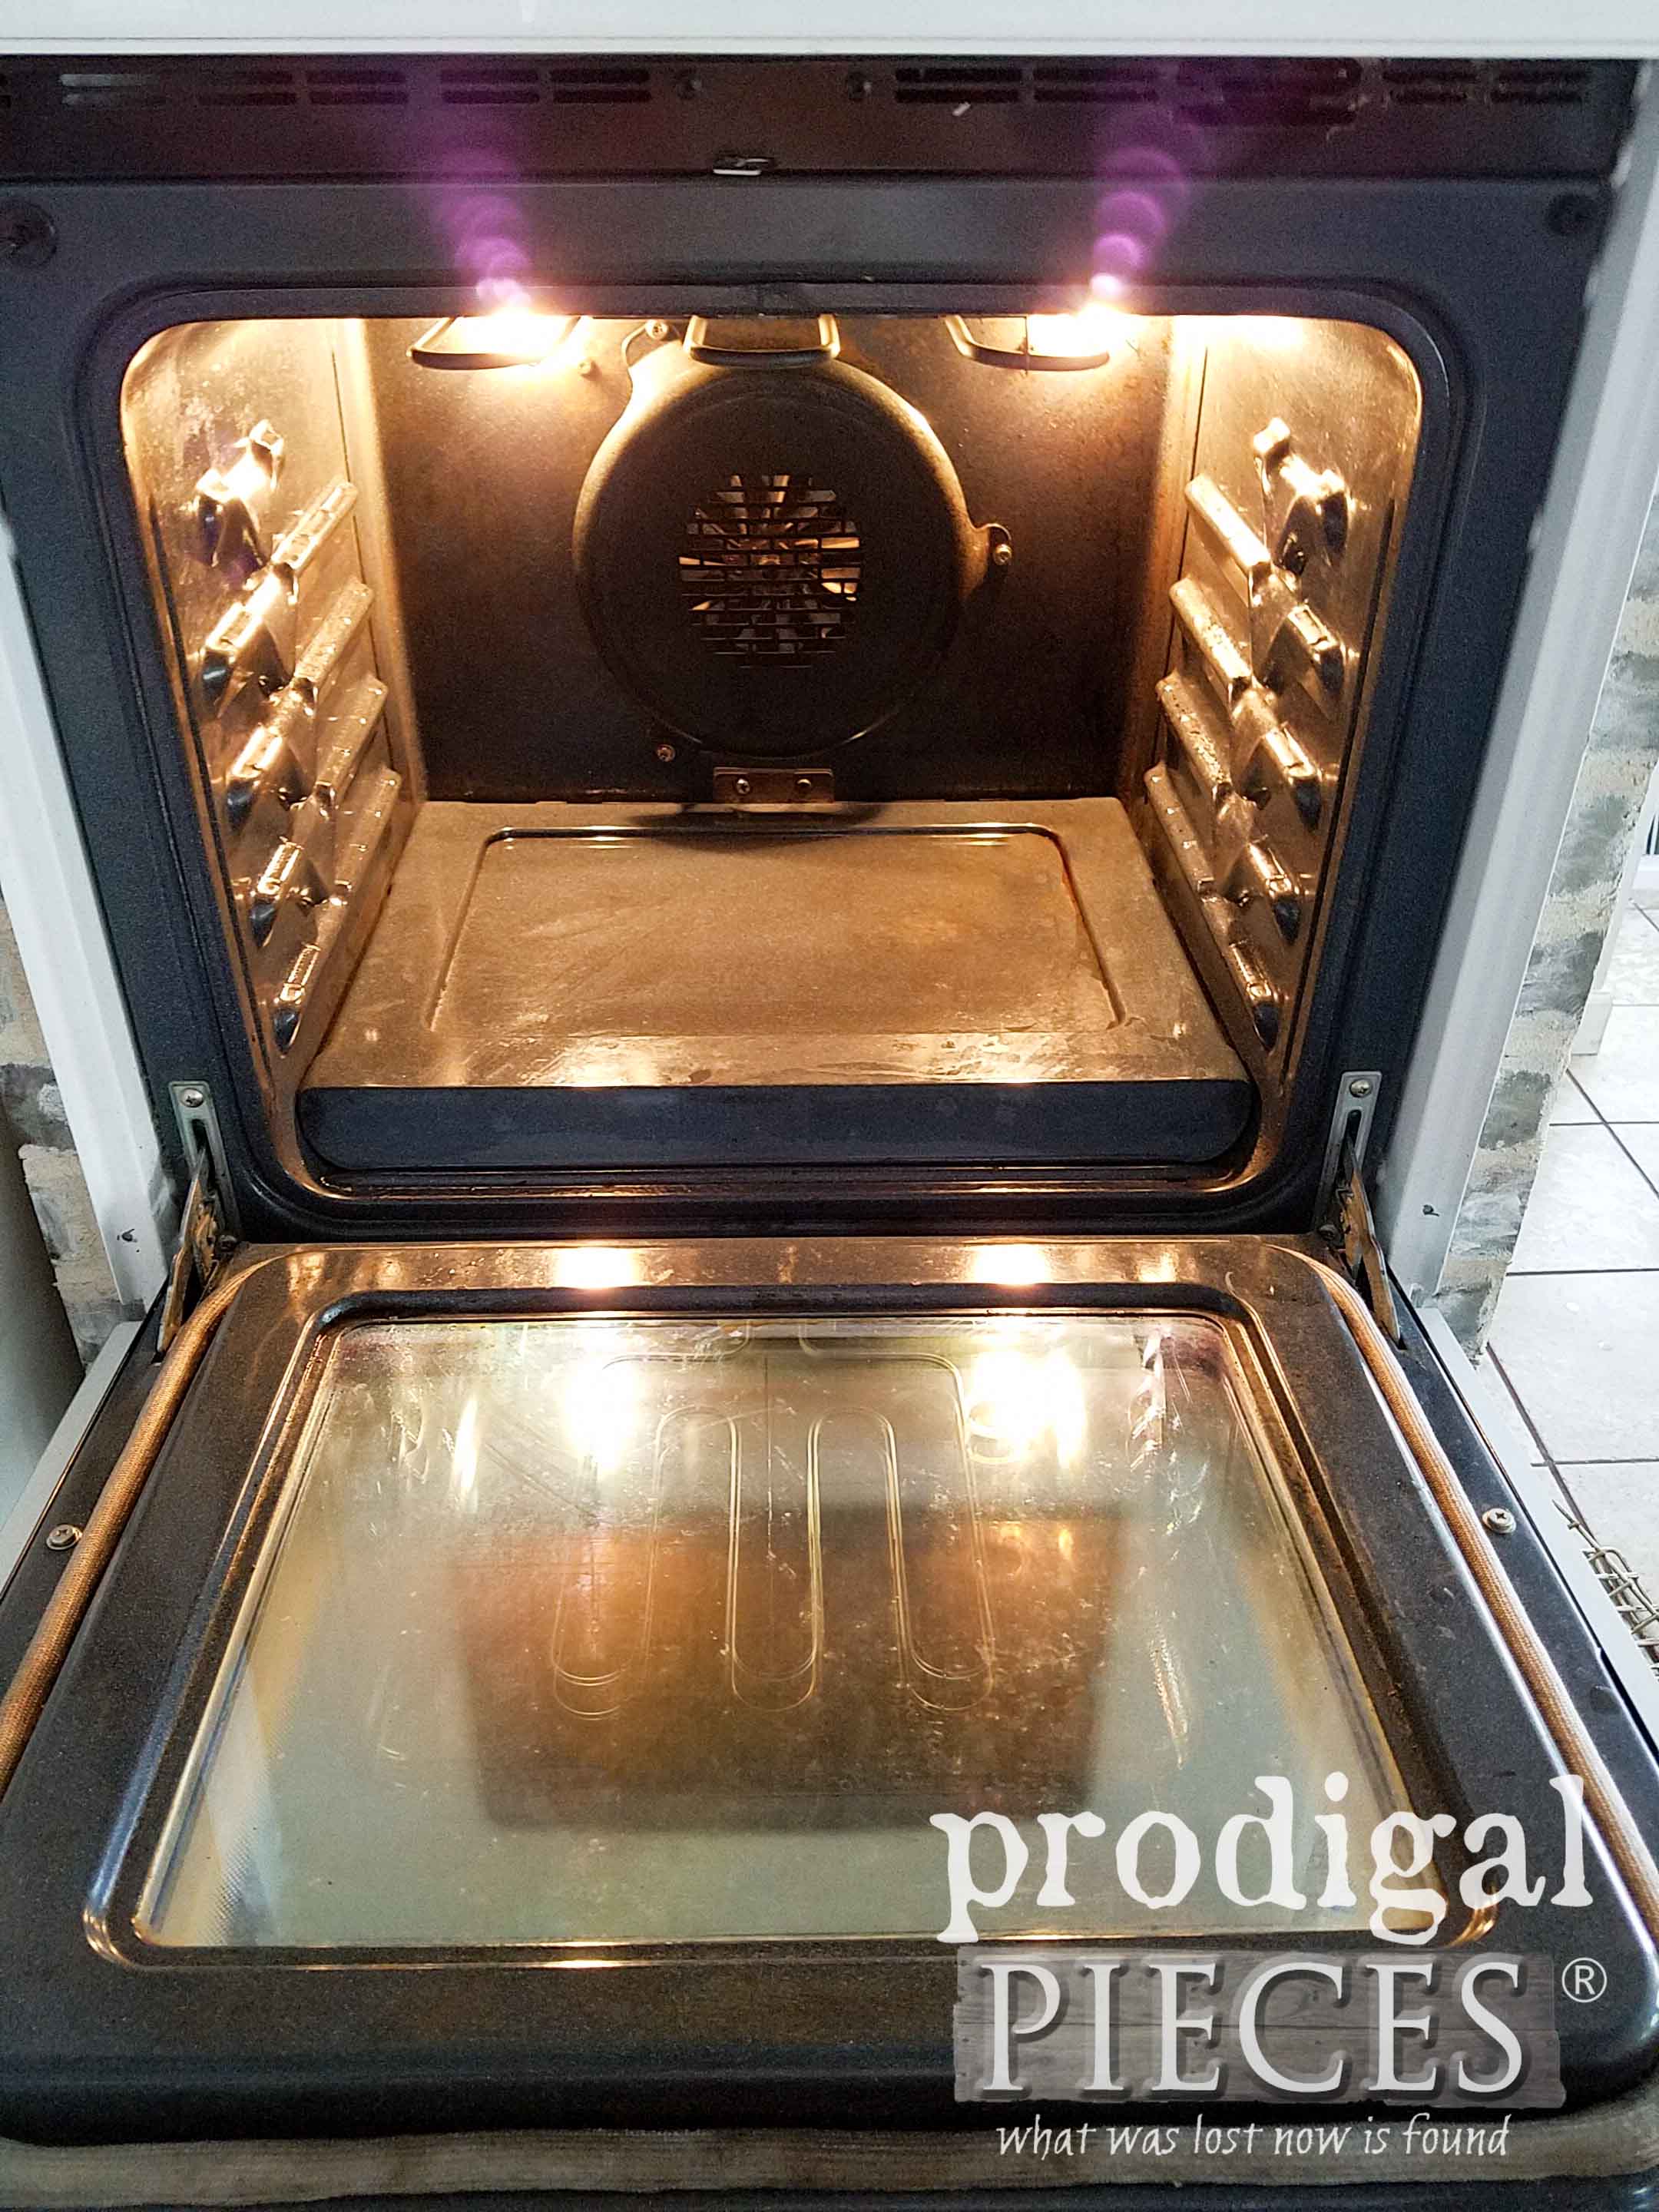 Shiny Clean Oven after Using HomeRight Steam Machine for Chemical-Free Cleaning by Prodigal Pieces | prodigalpieces.com